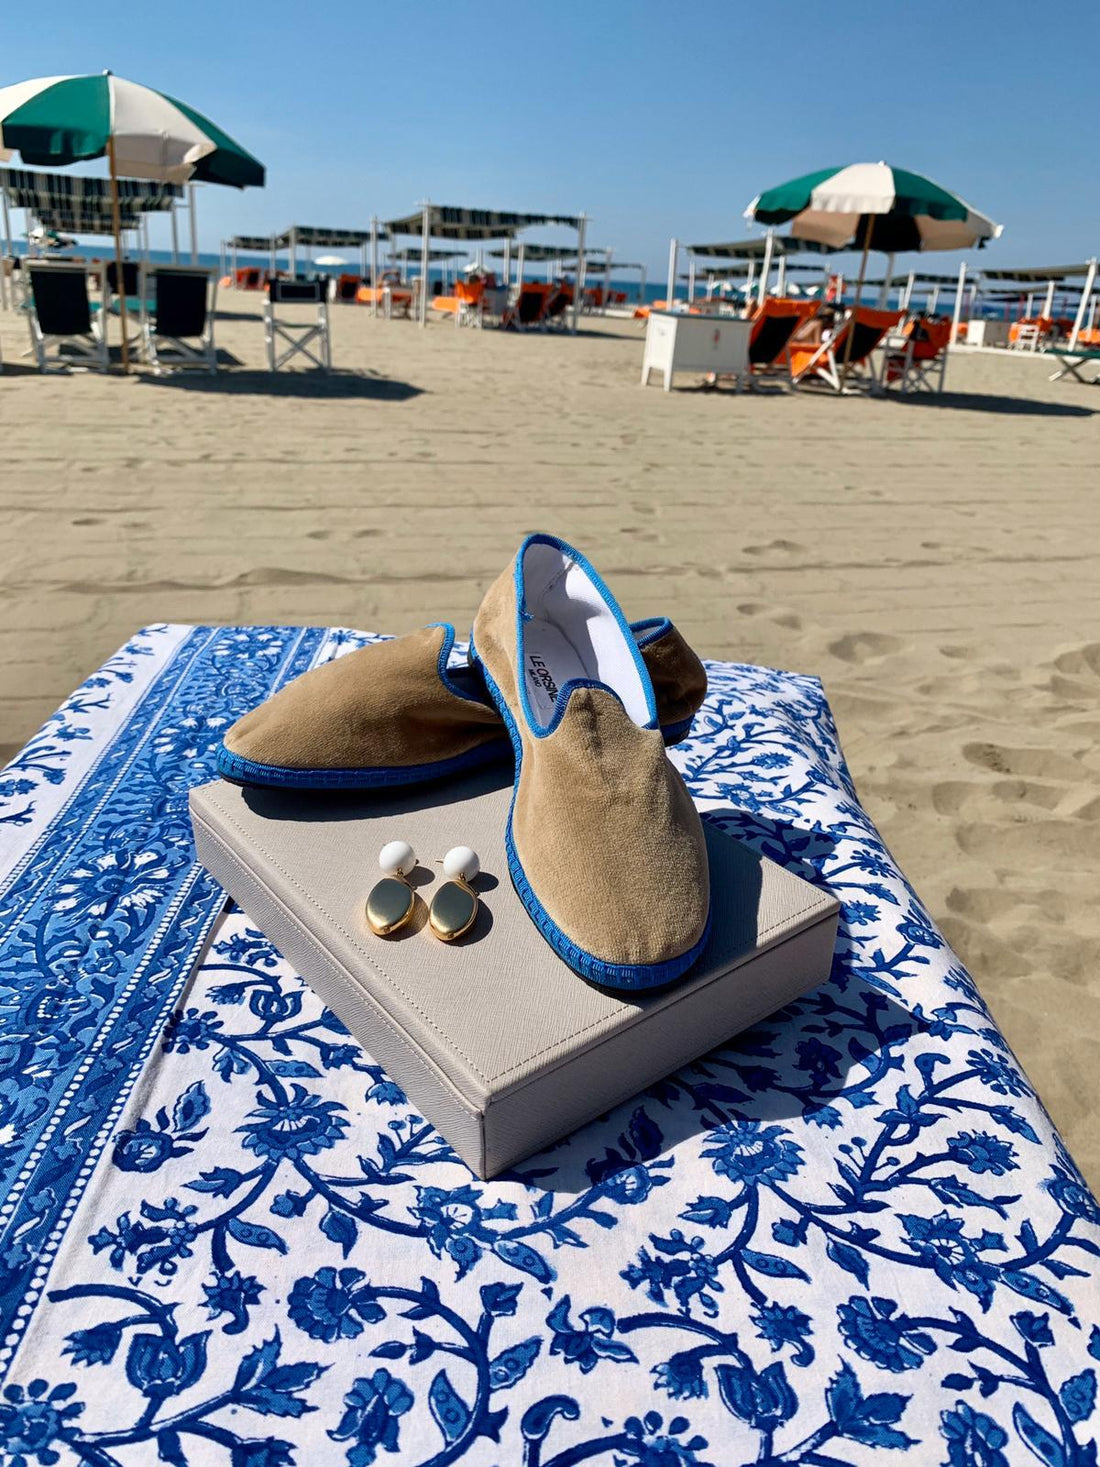 TRAVEL: Forte Dei Marmi - 1 Suitcase filled with shoes and great memories